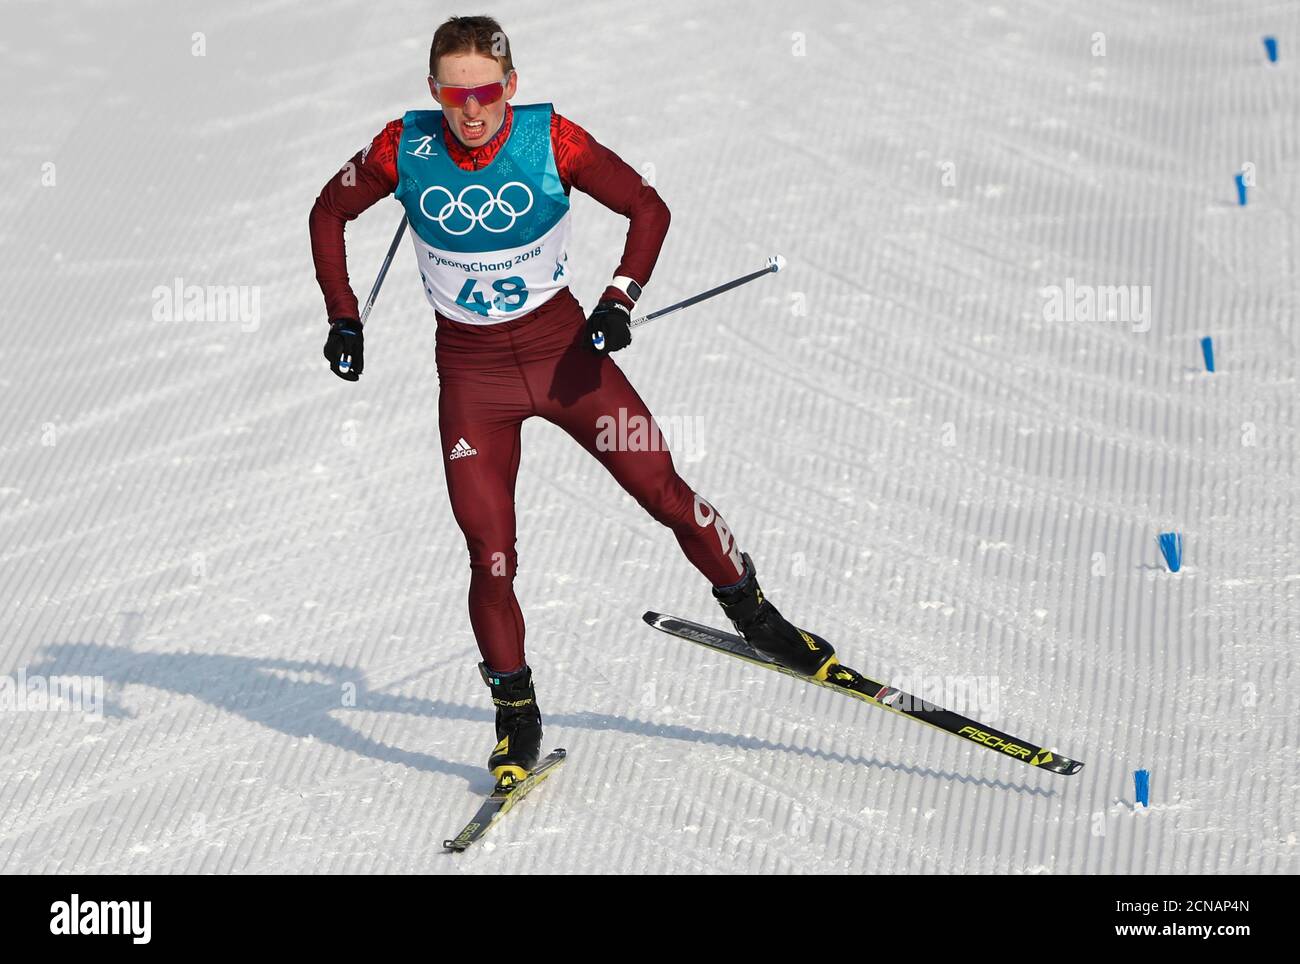 Cross-Country Skiing – Pyeongchang 2018 Winter Olympics – Men's 15km Free – Alpensia Cross-Country Skiing Centre – Pyeongchang, South Korea – February 16, 2018 - Denis Spitsov, an Olympic athlete from Russia, competes. REUTERS/Murad Sezer Stock Photo